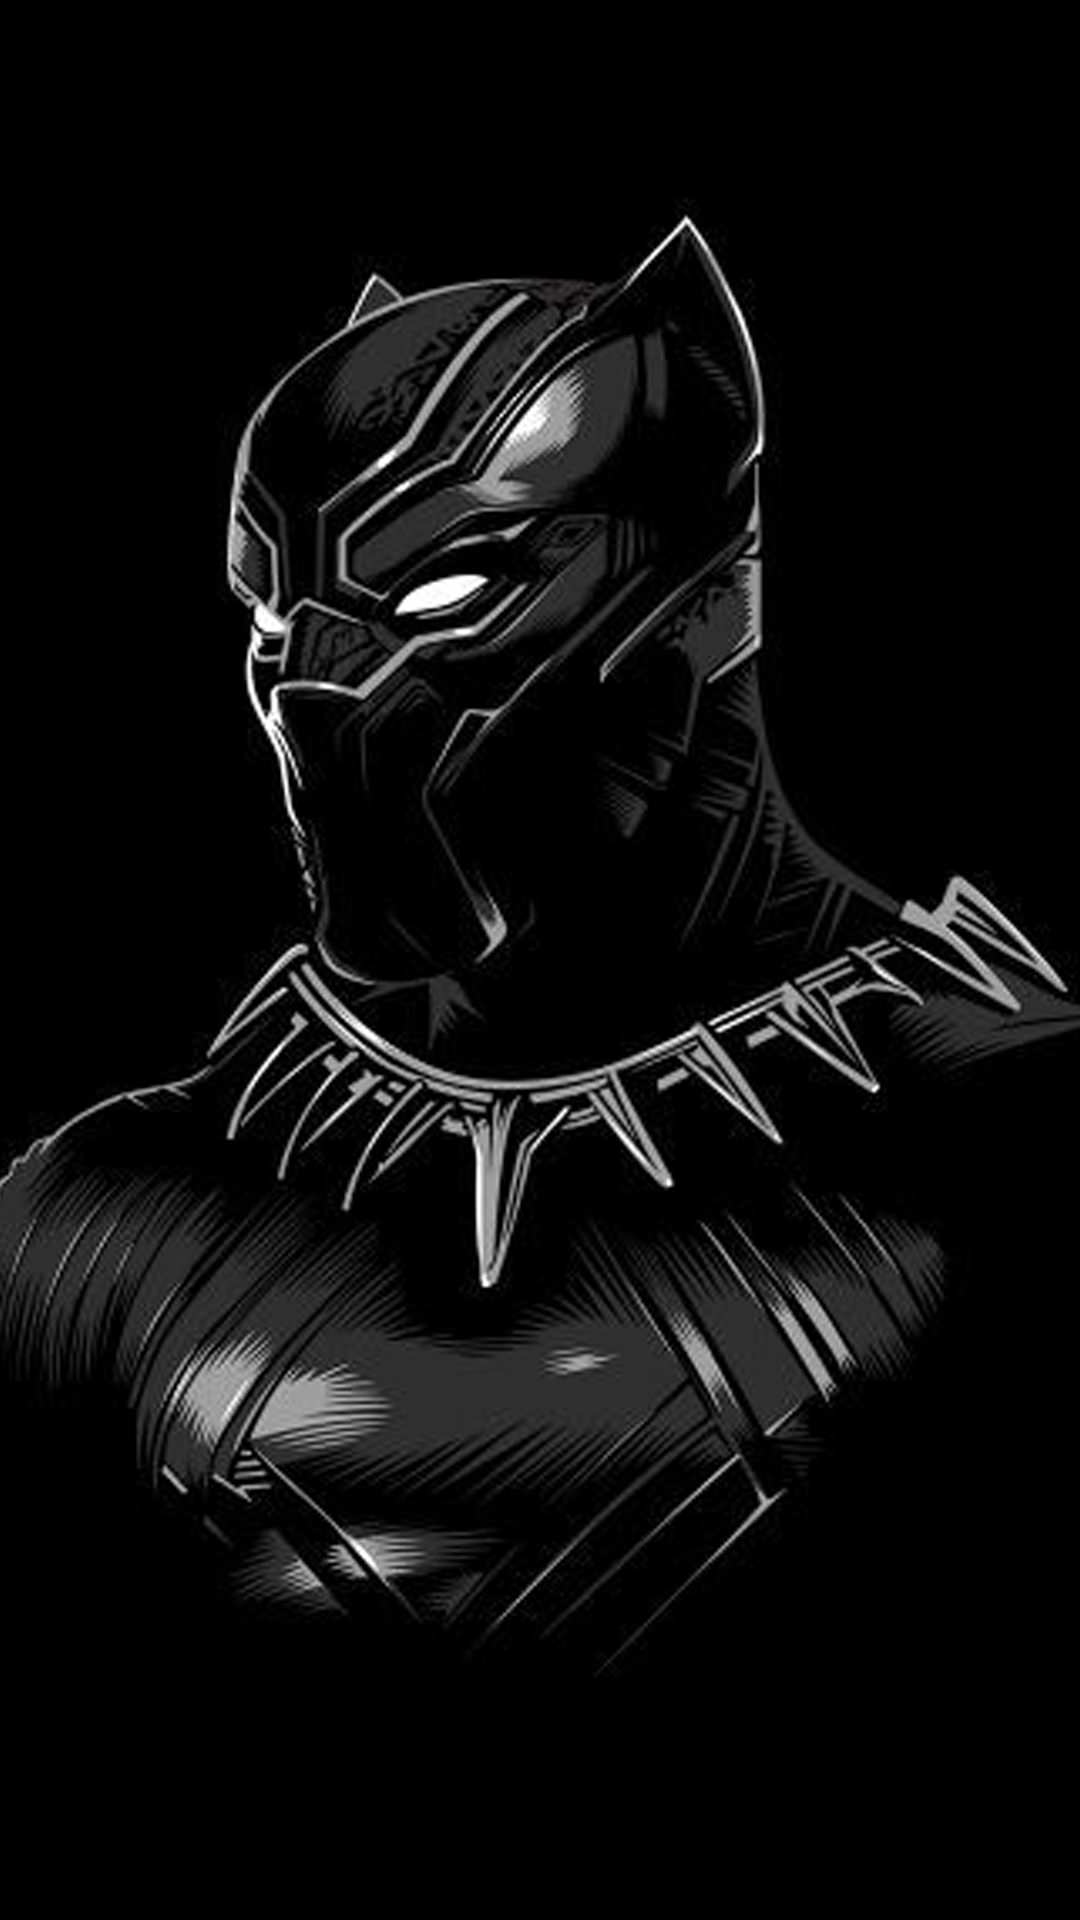 Black Panther Iphone Wallpapers